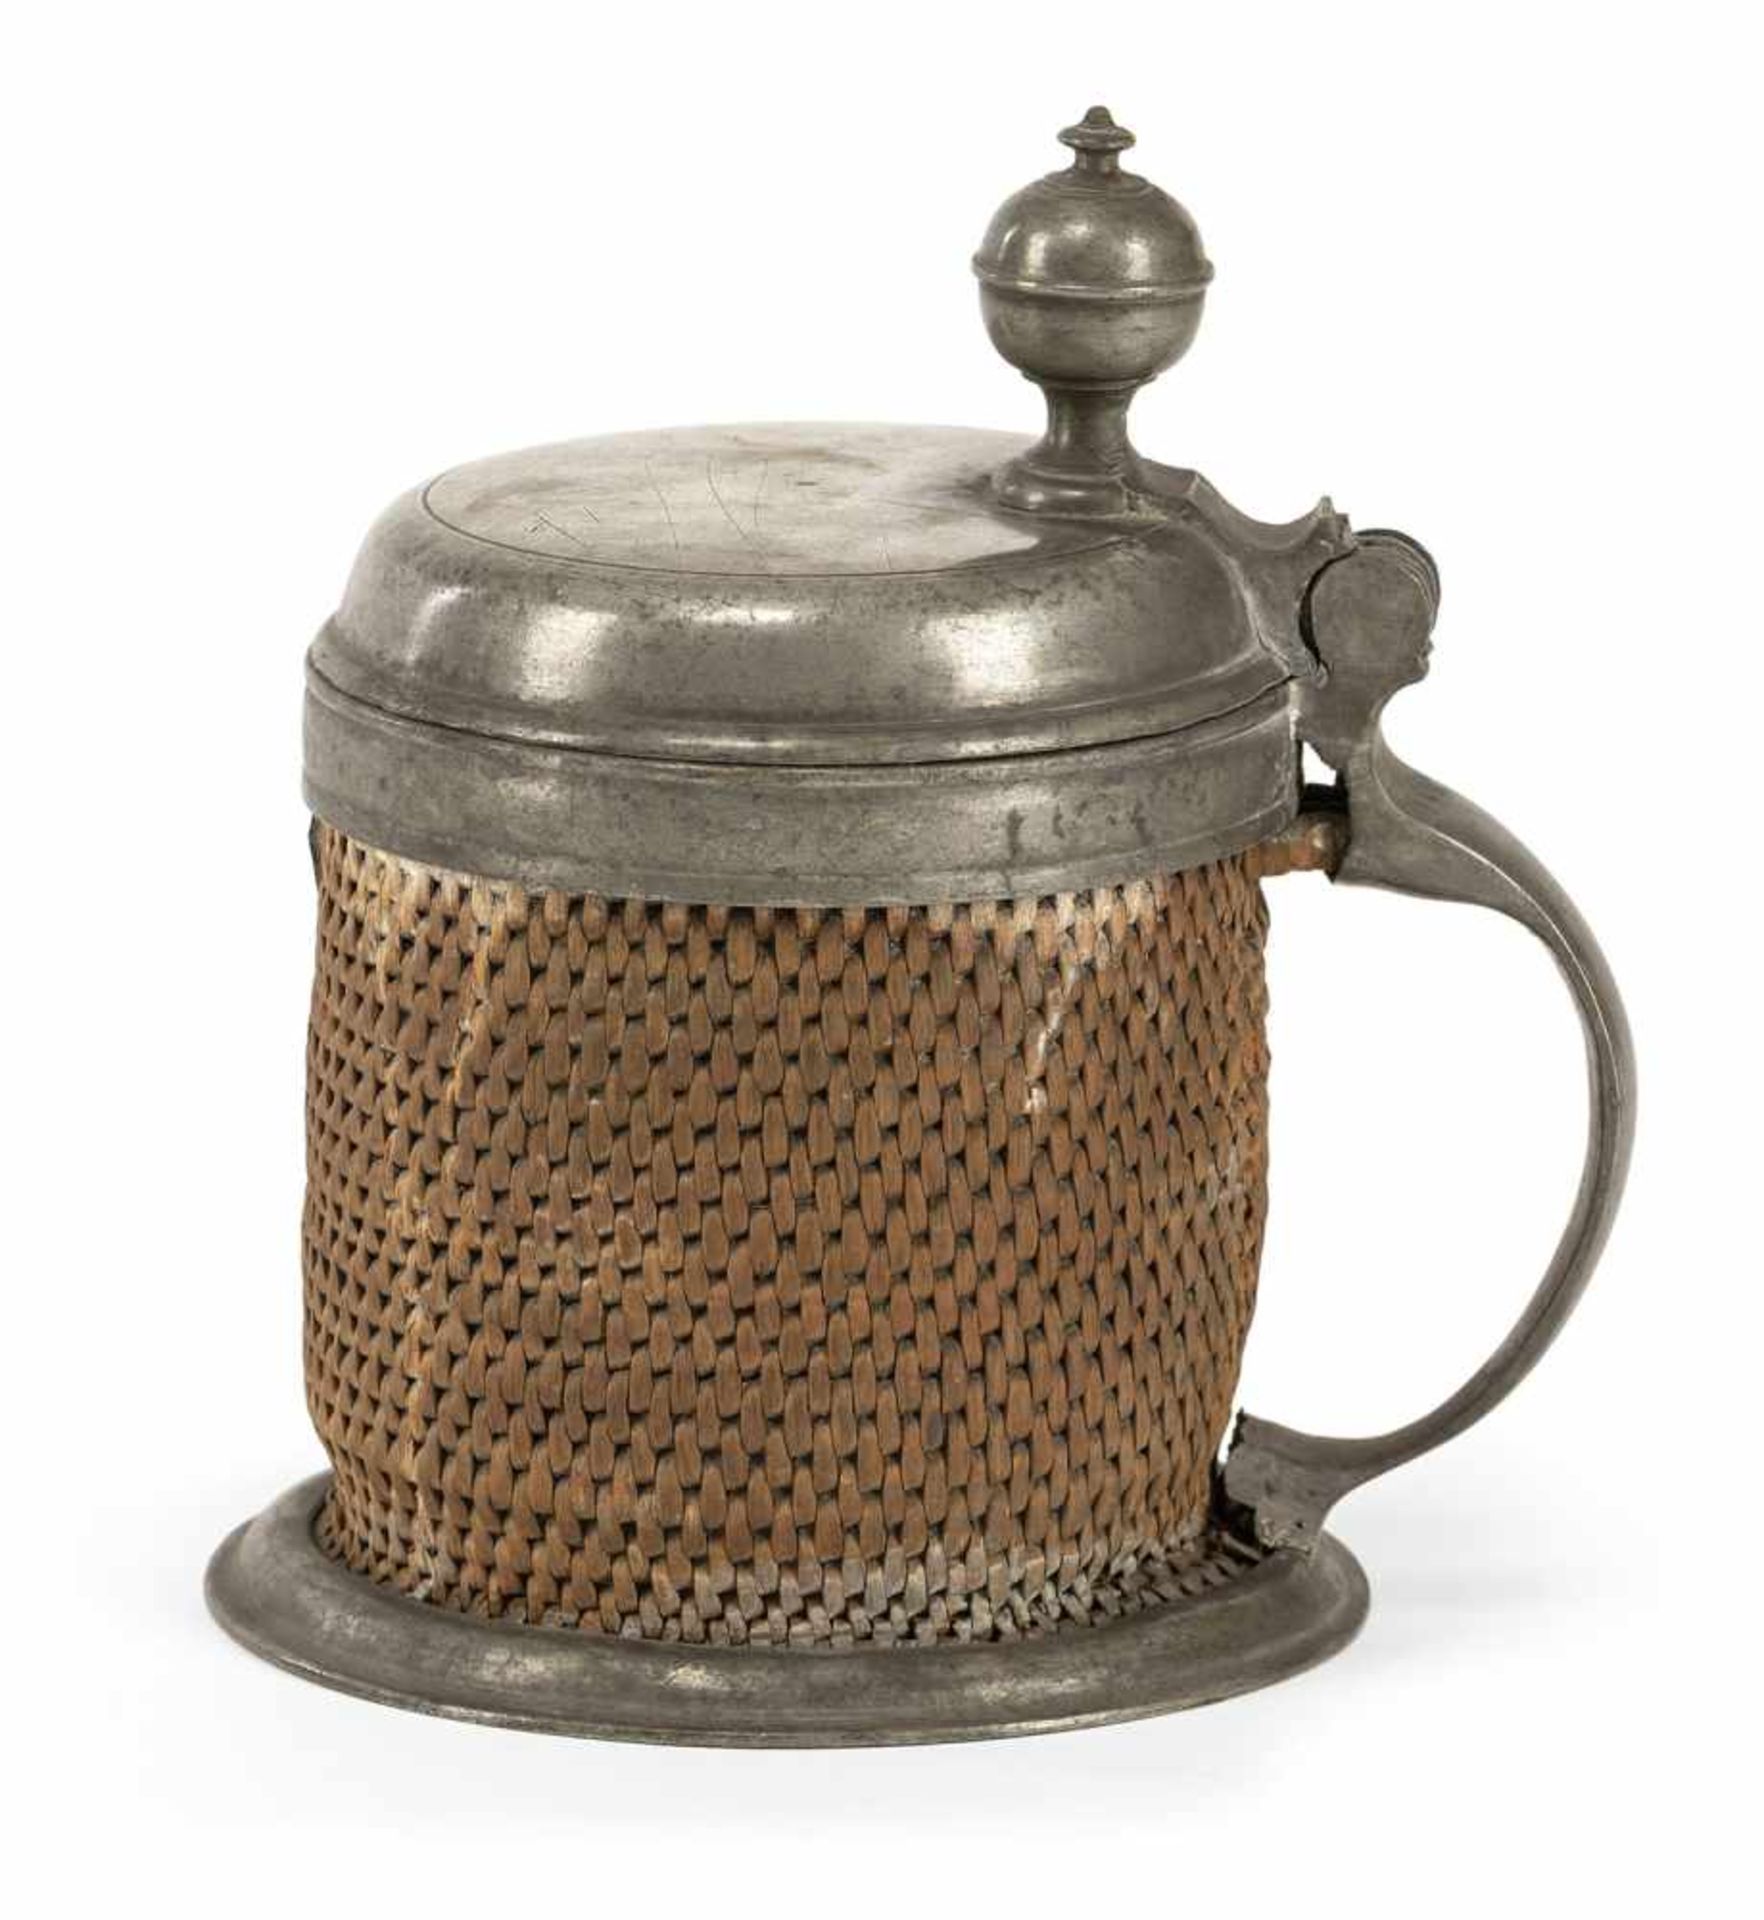 BAST WICKERWORK TANKARD WITH PEWTER MOUNTS, probably Bohemia, 18th century. Pewter with Karlsbad